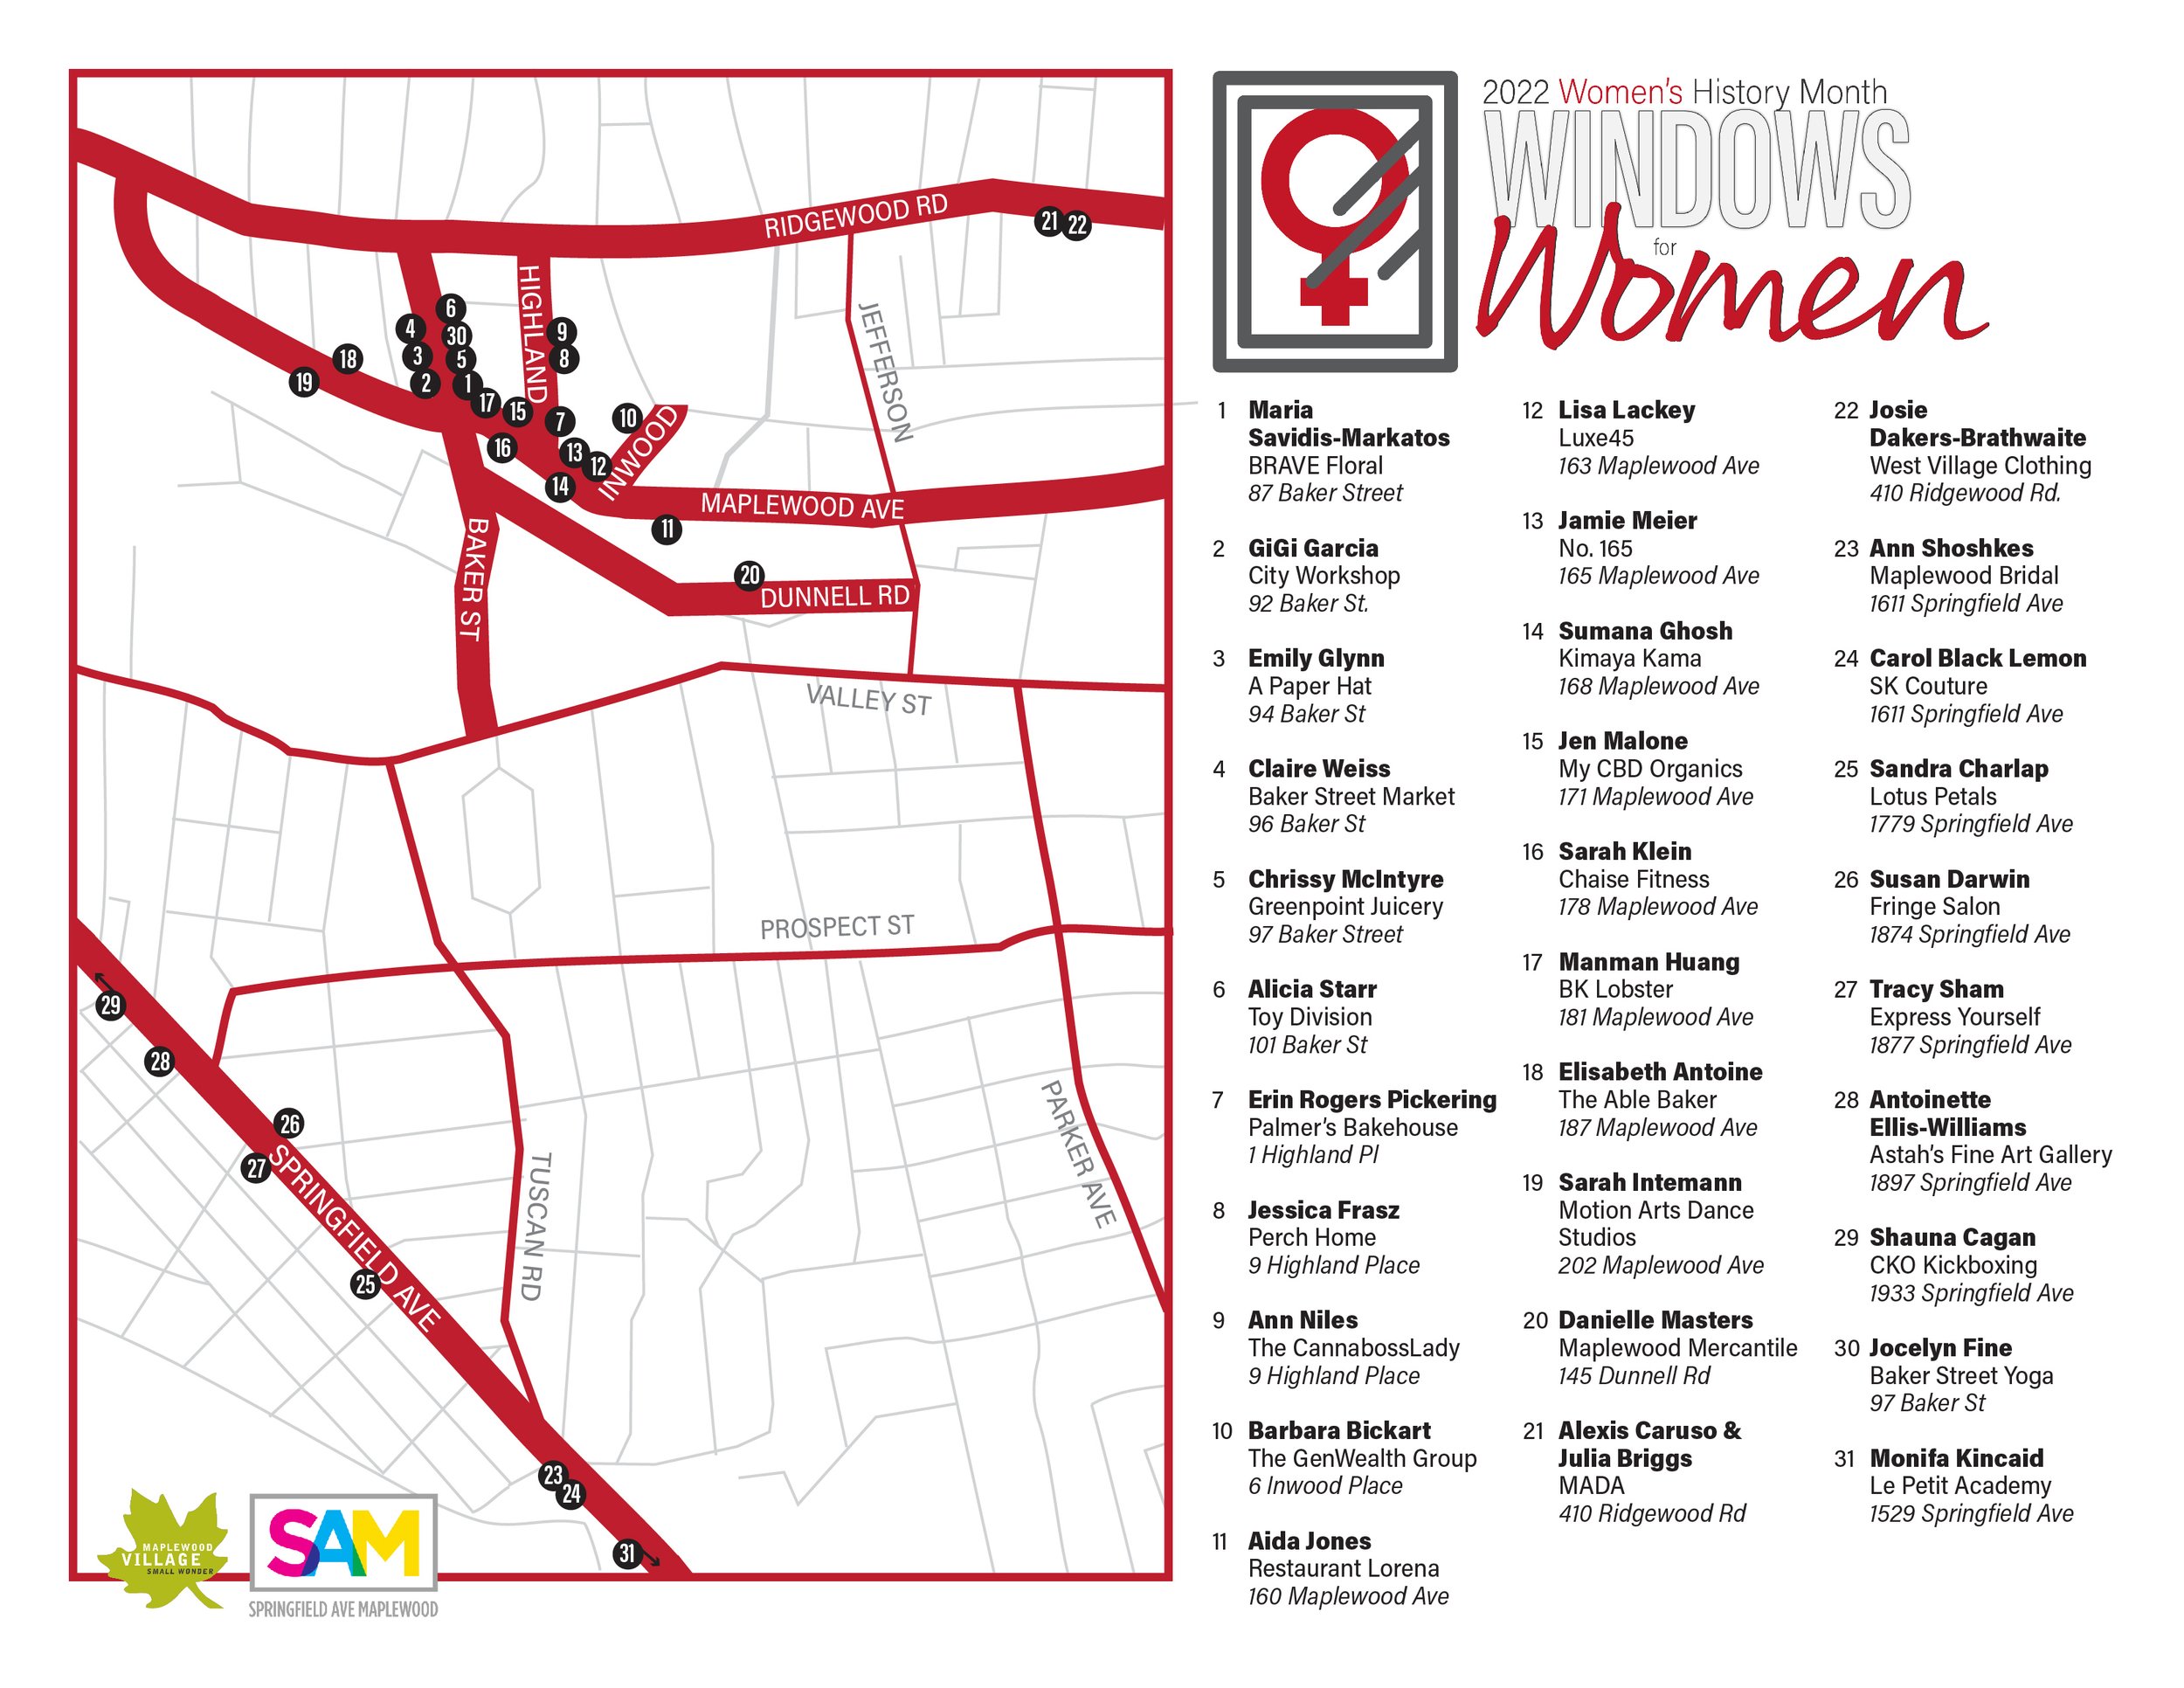 Map for Maplewood Windows for Women women's history month program in Maplewood NJ